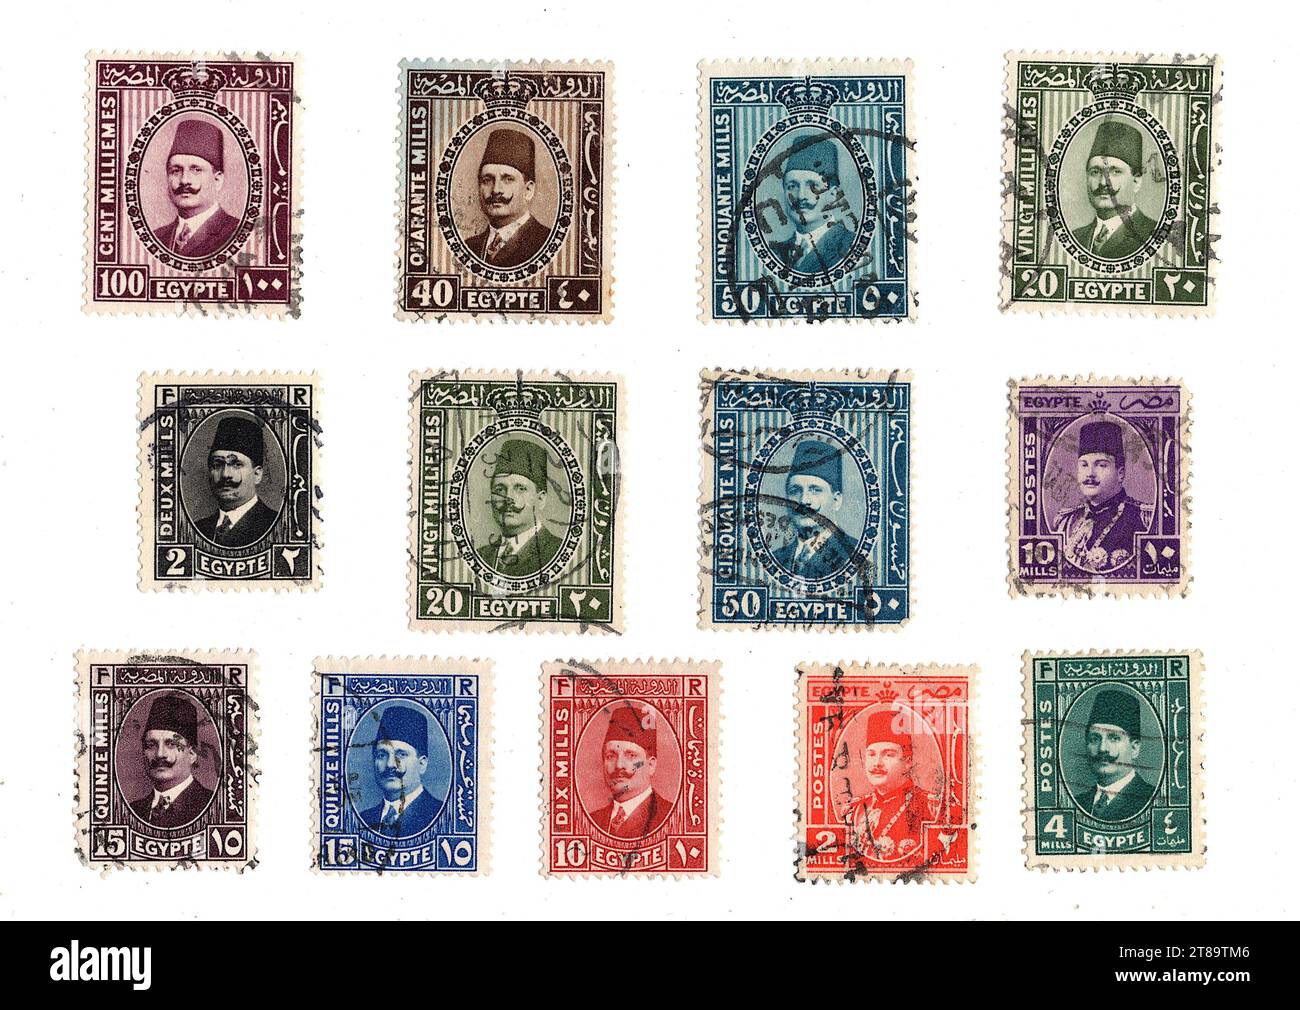 A montage of vintage postage stamps from Egypt featuring a portrait of King Farouk on a white background. Stock Photo